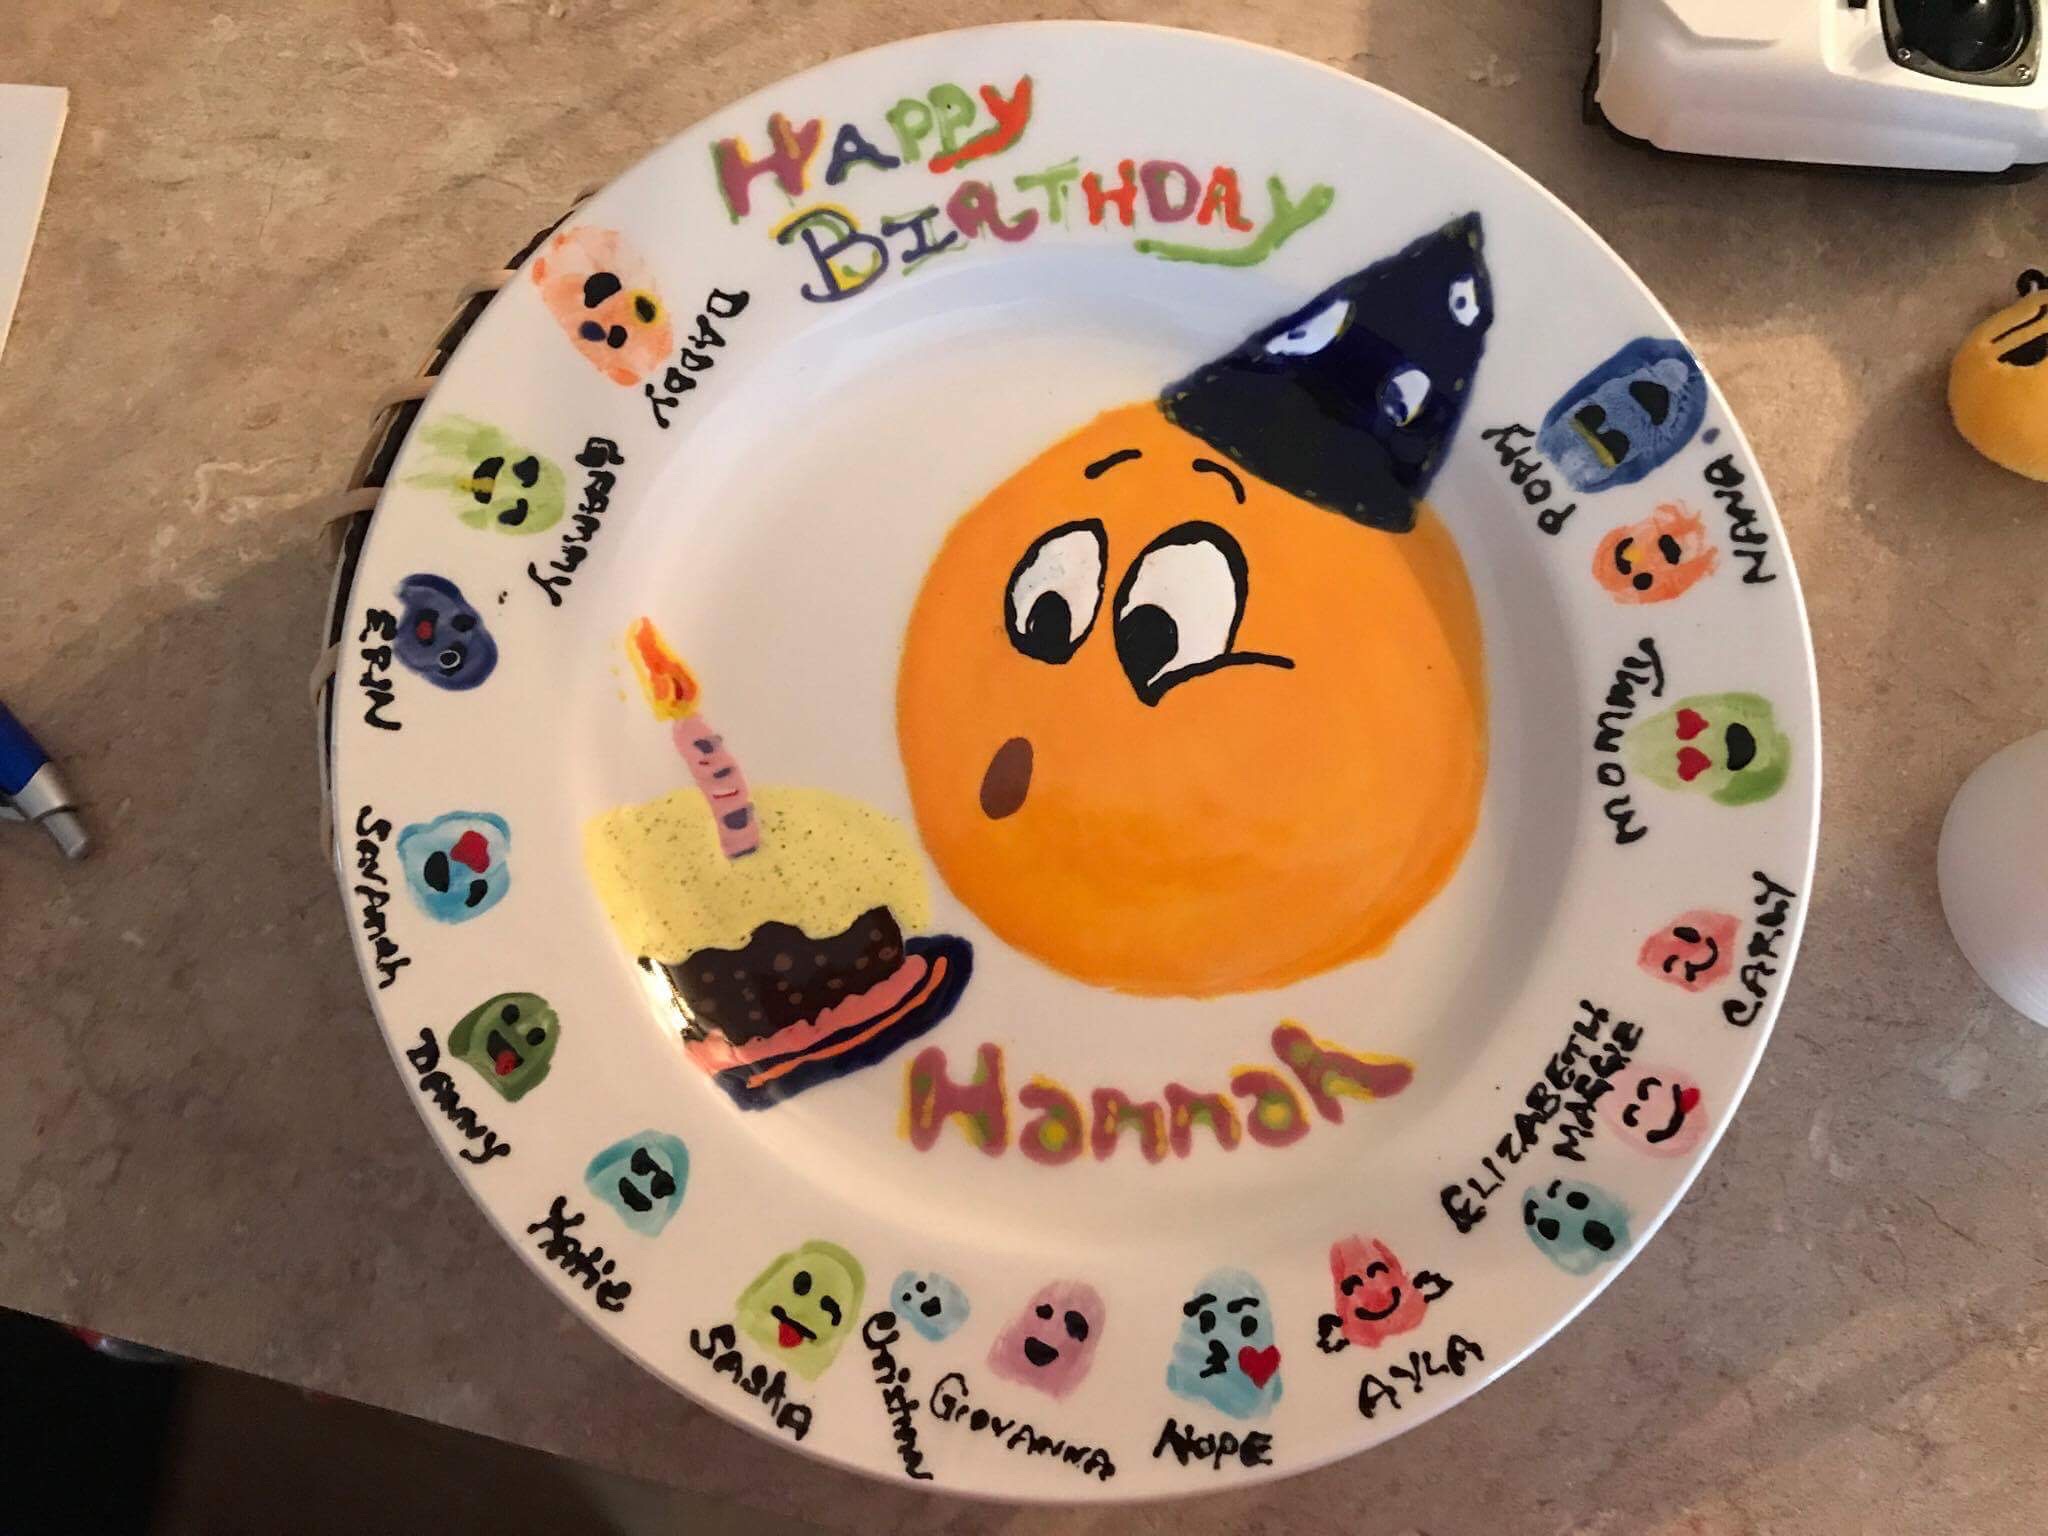 An example of the customized birthday plate you get to take home when you throw a party with us!